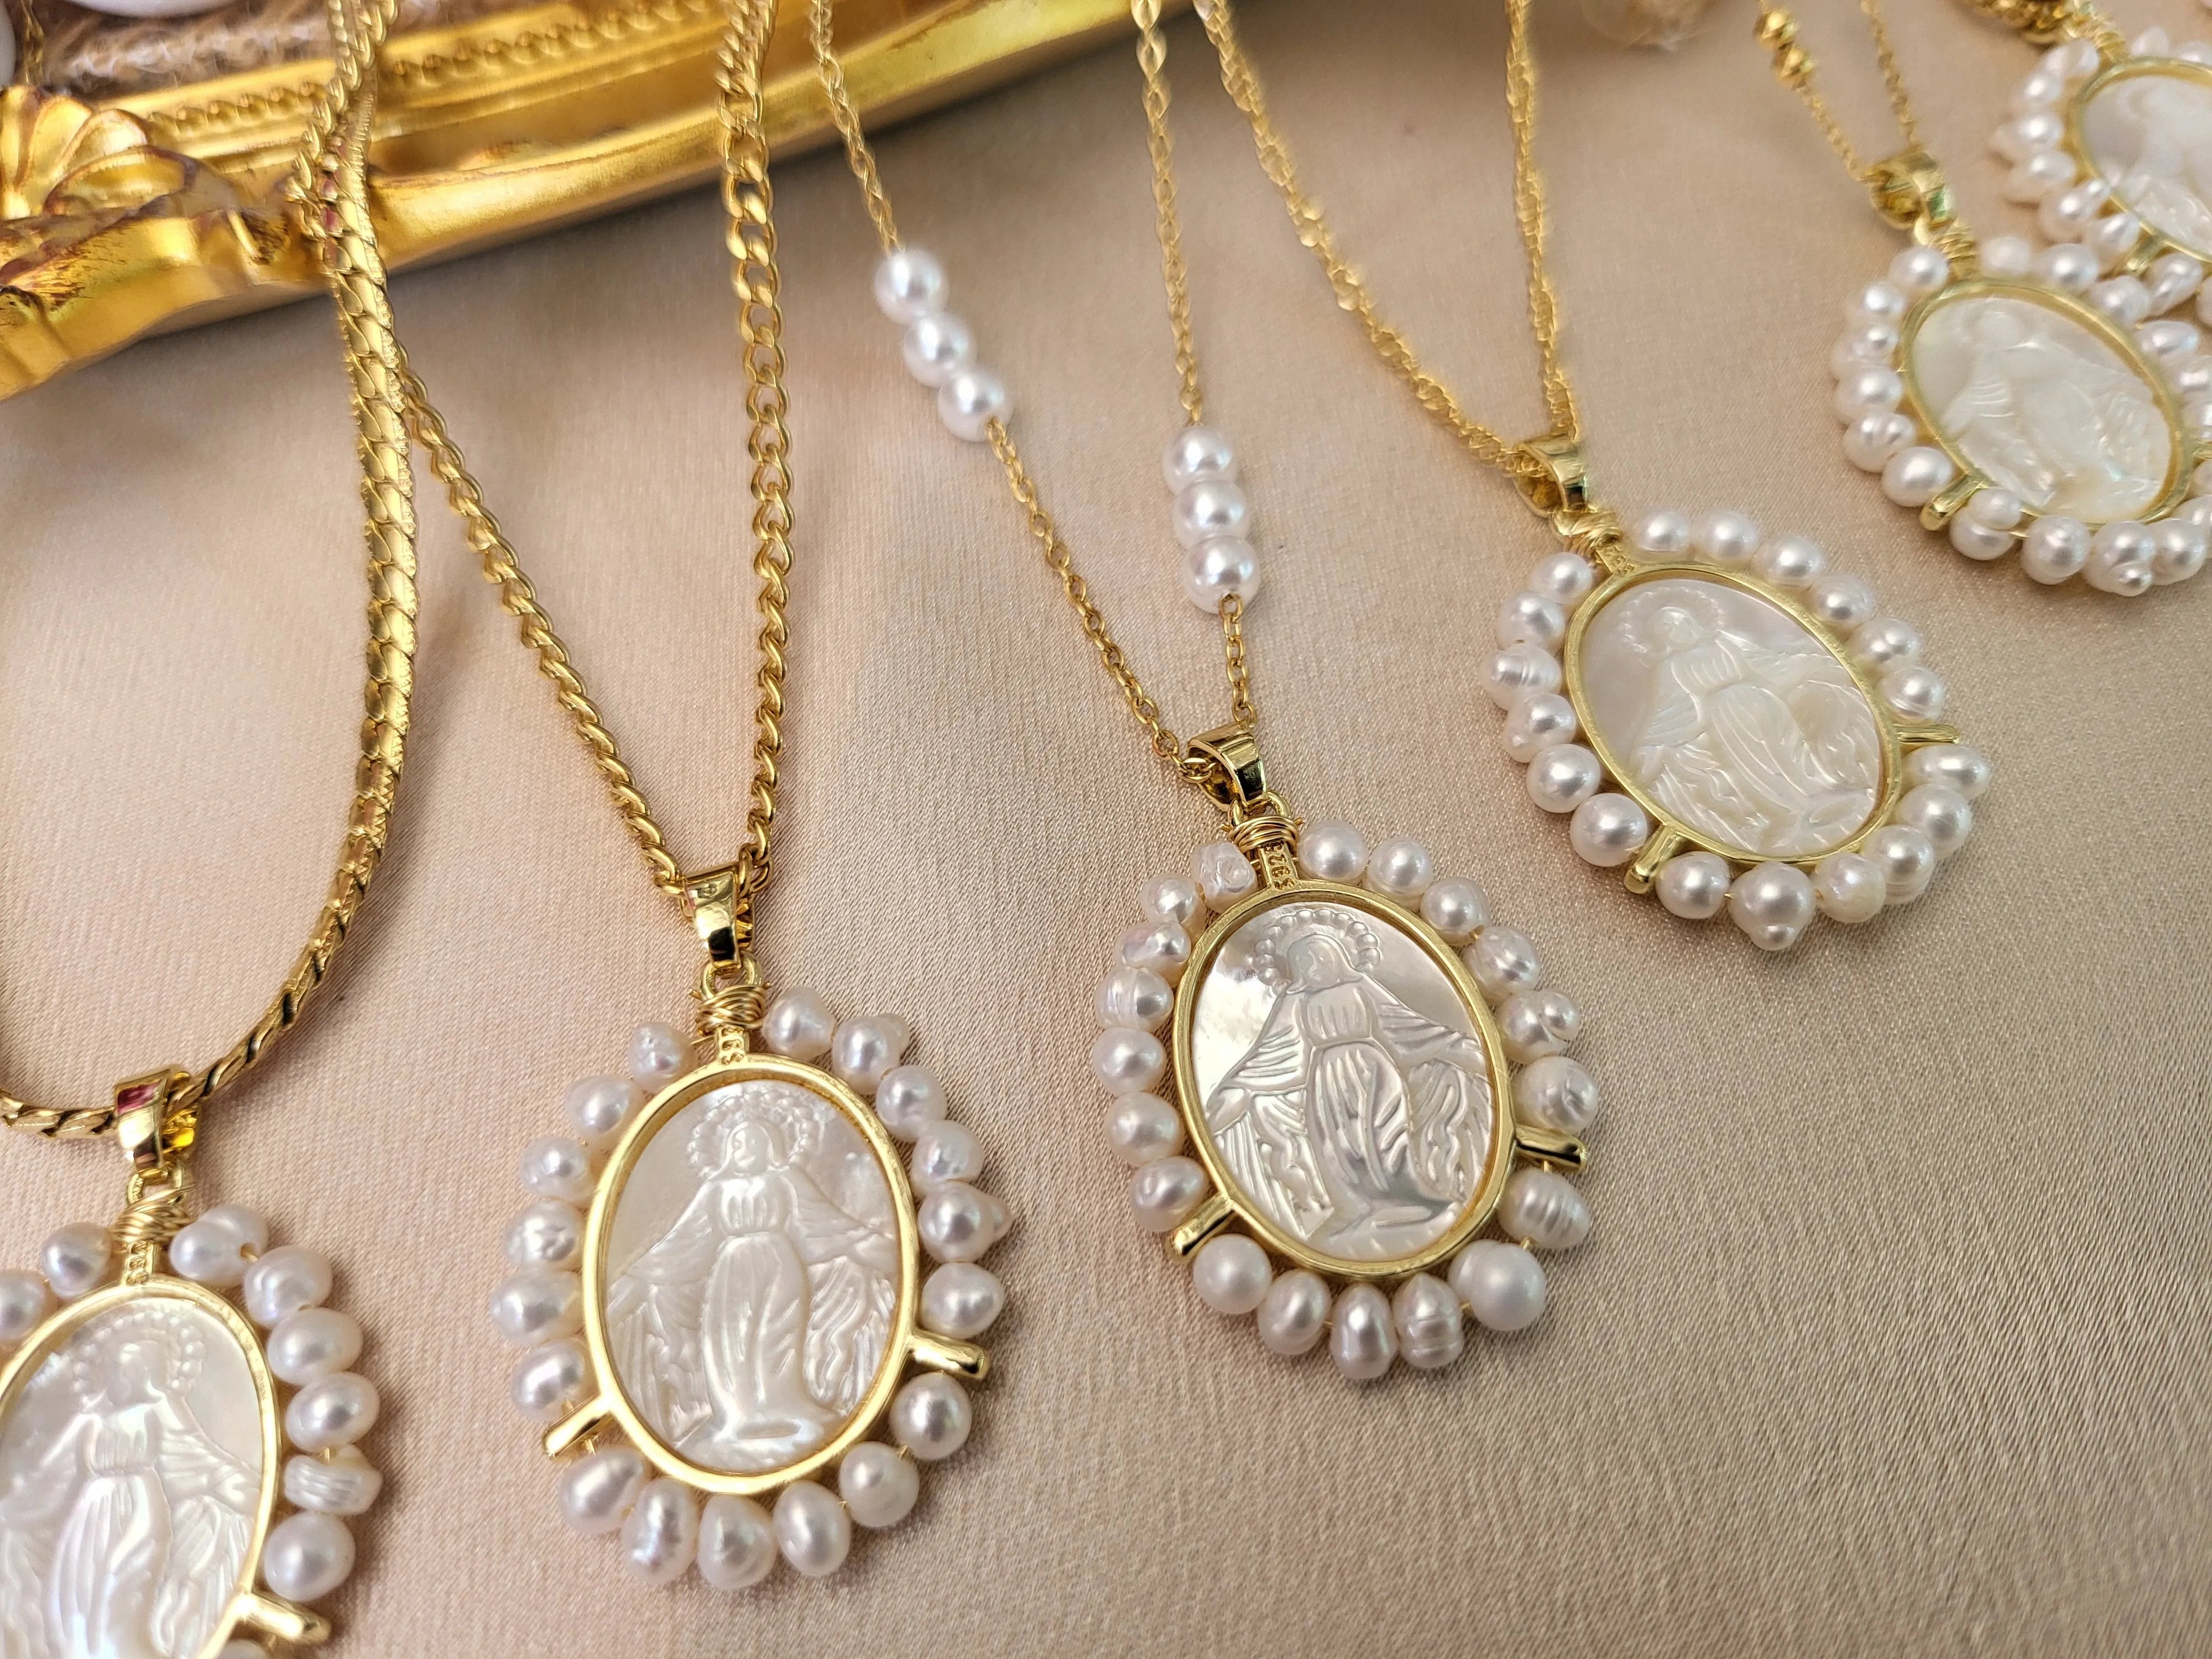 Mary Pearl Necklace product images.